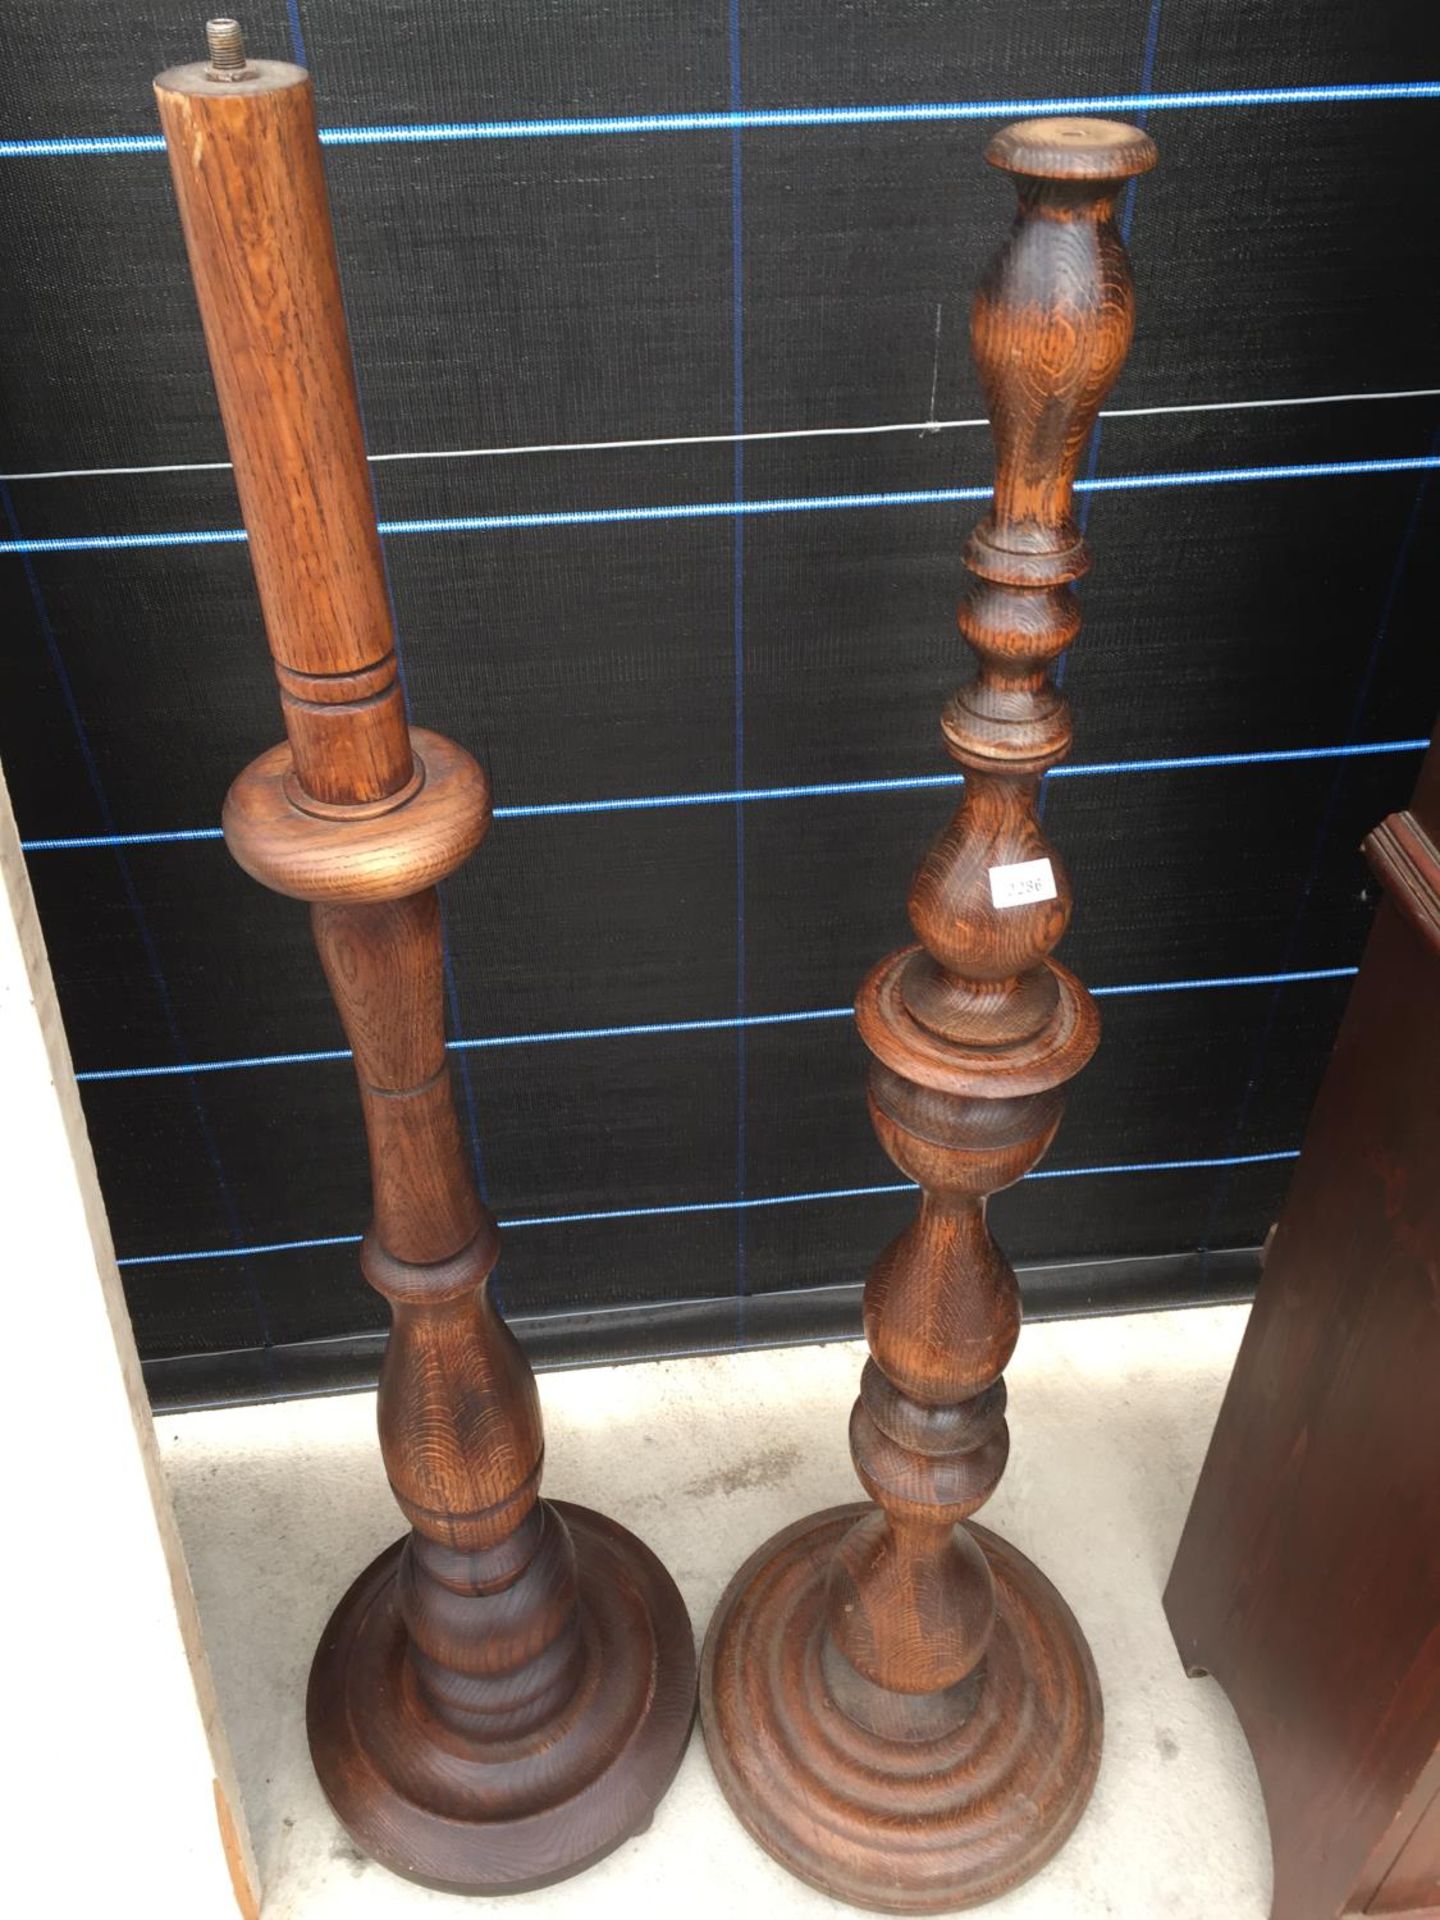 TWO SIMILAR OAK STANDARD LAMPS WITH TURNED COLUMNS